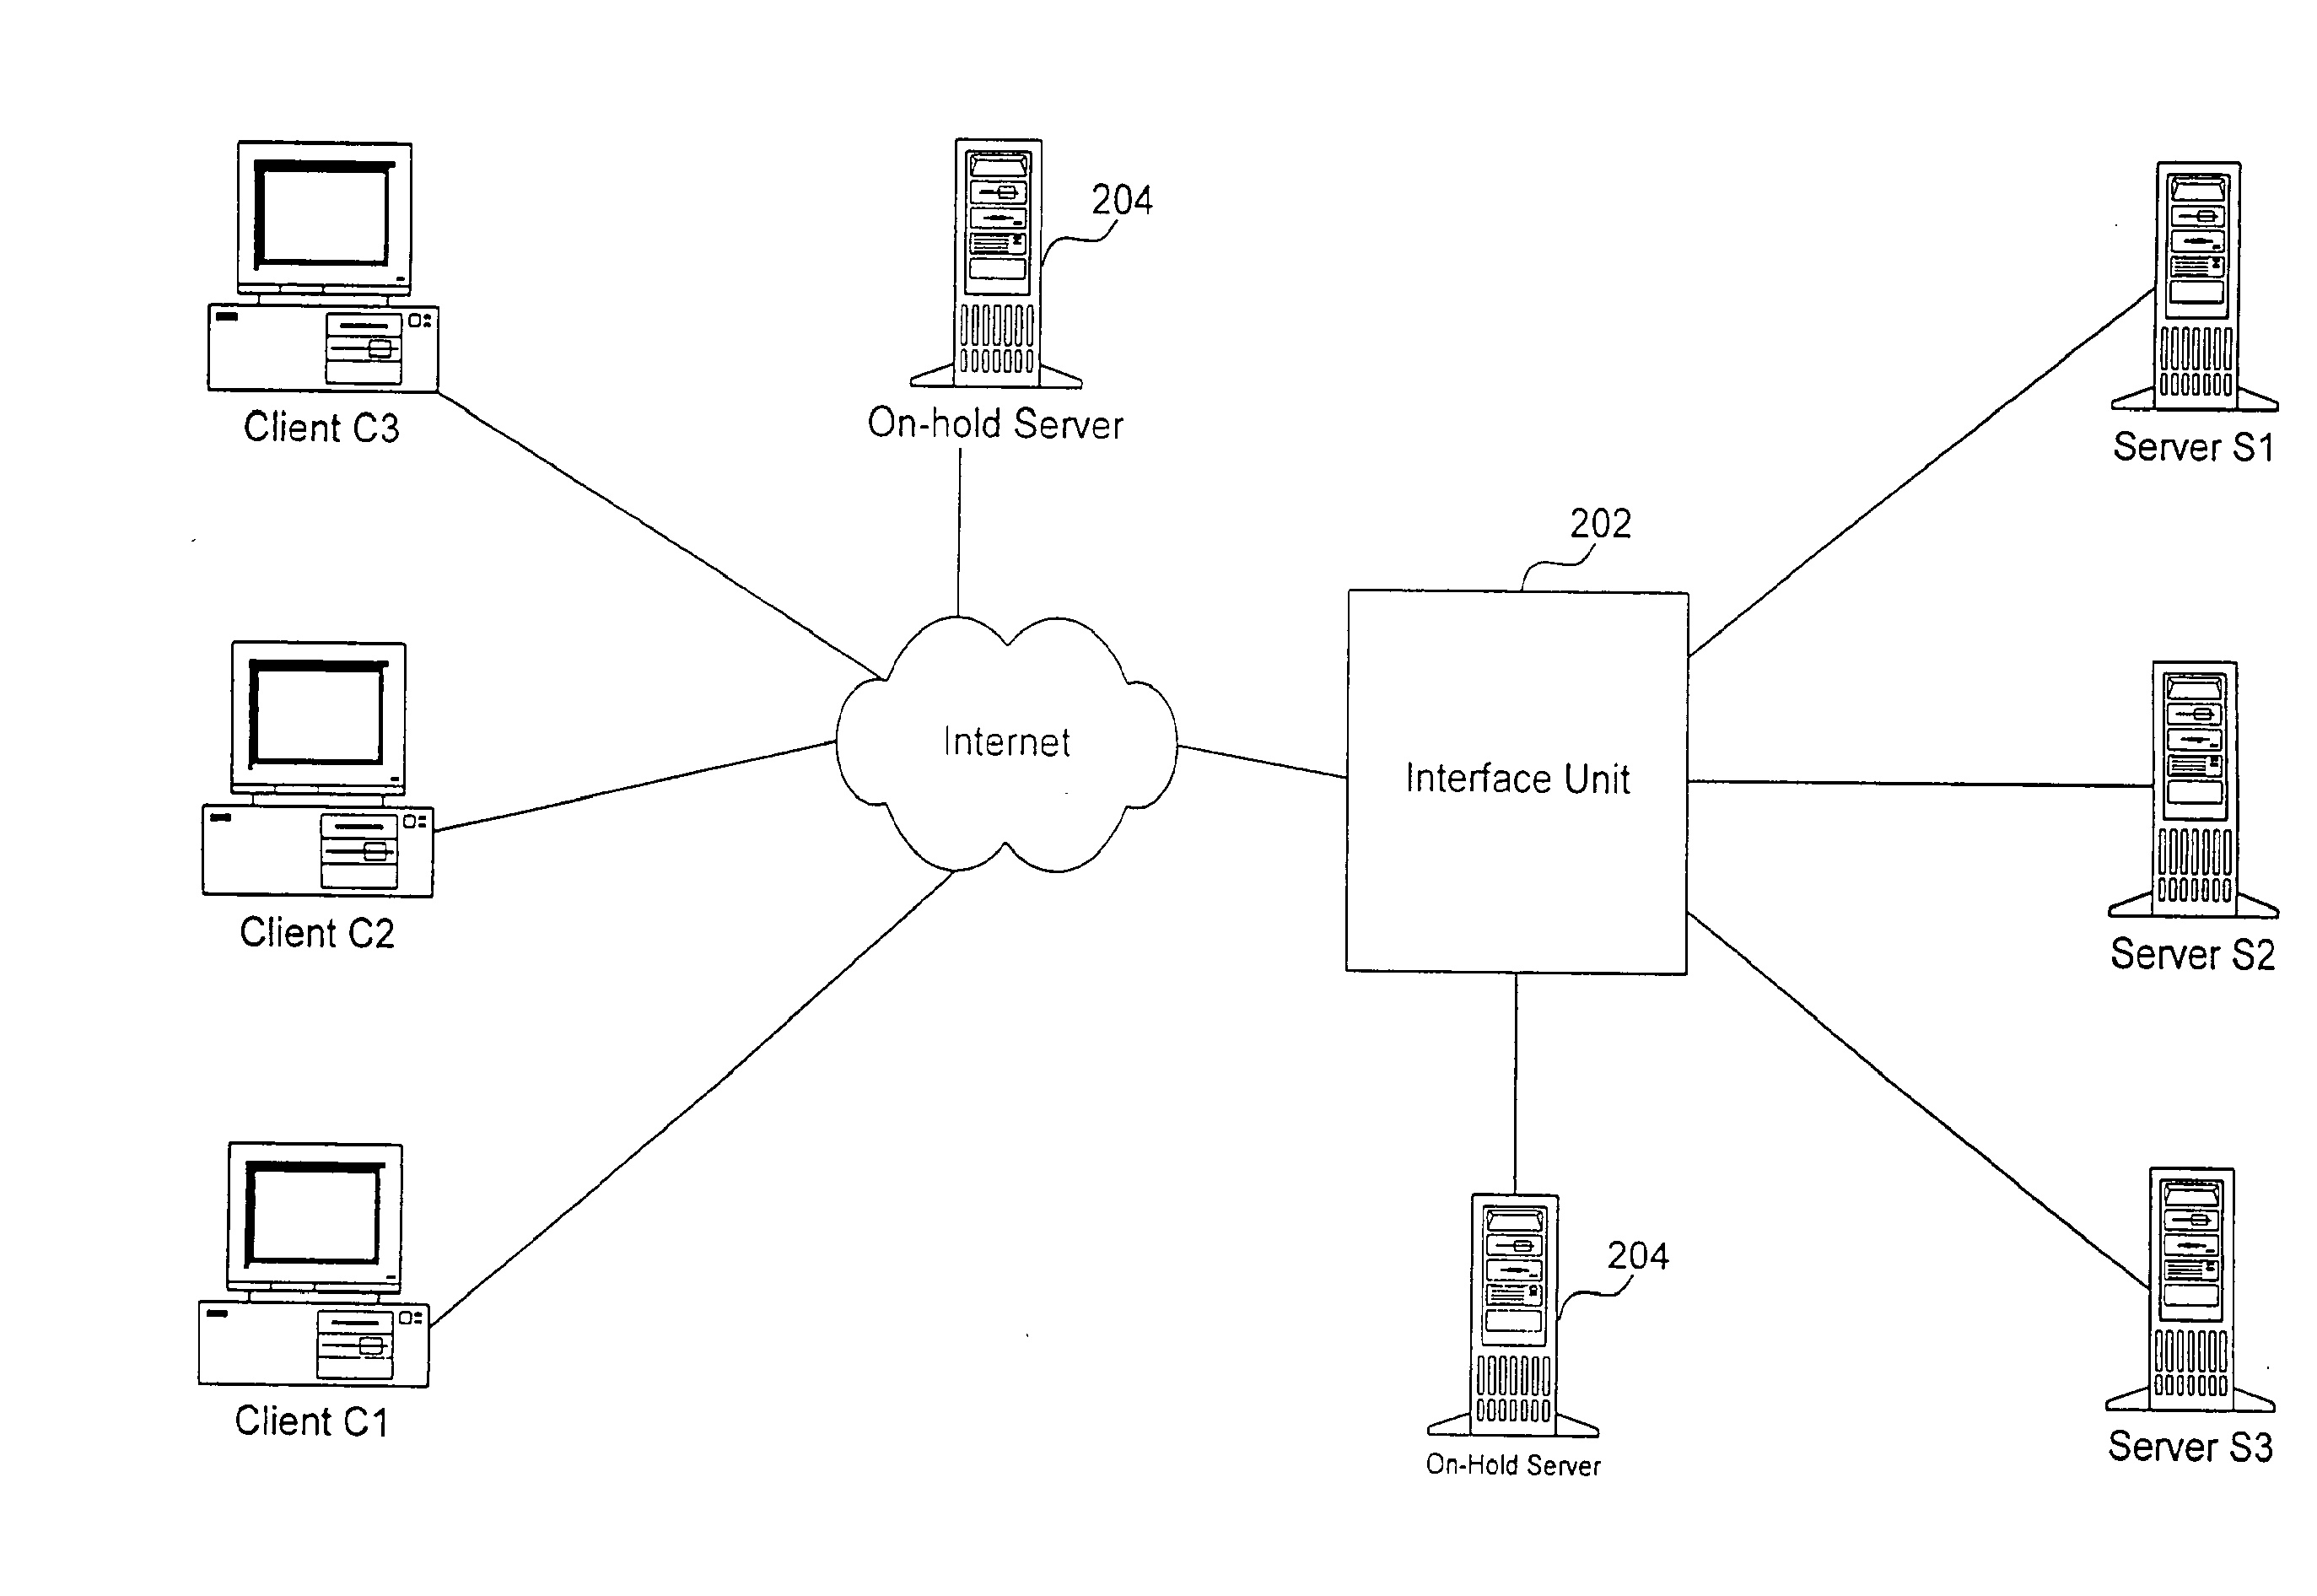 Apparatus, method and computer program product for guaranteed content delivery incorporating putting a client on-hold based on response time